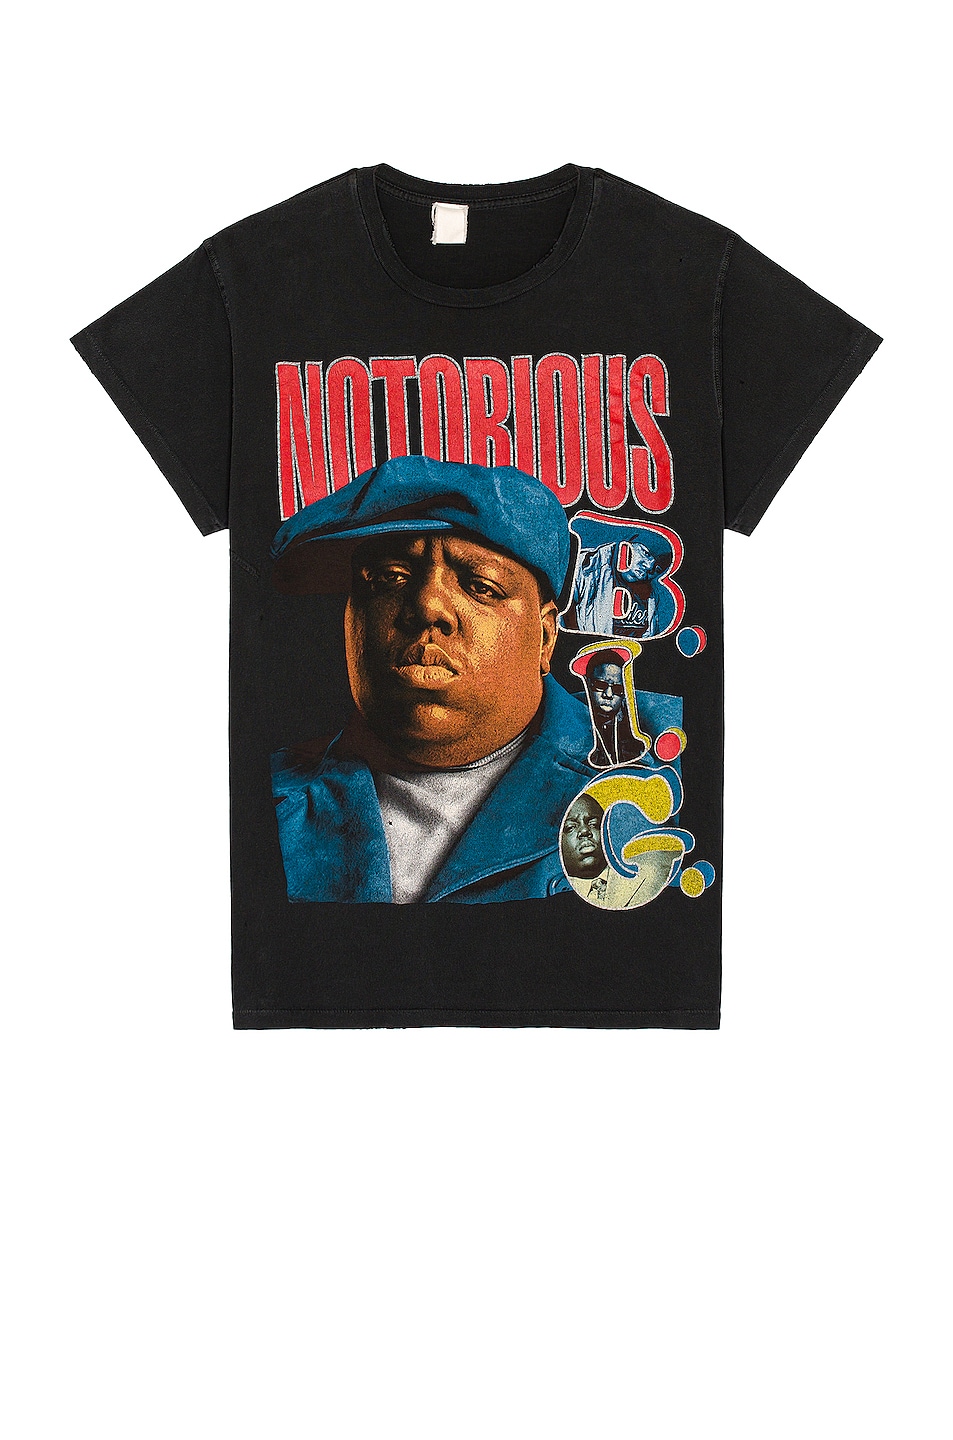 Notorious BIG T-Shirt in Black